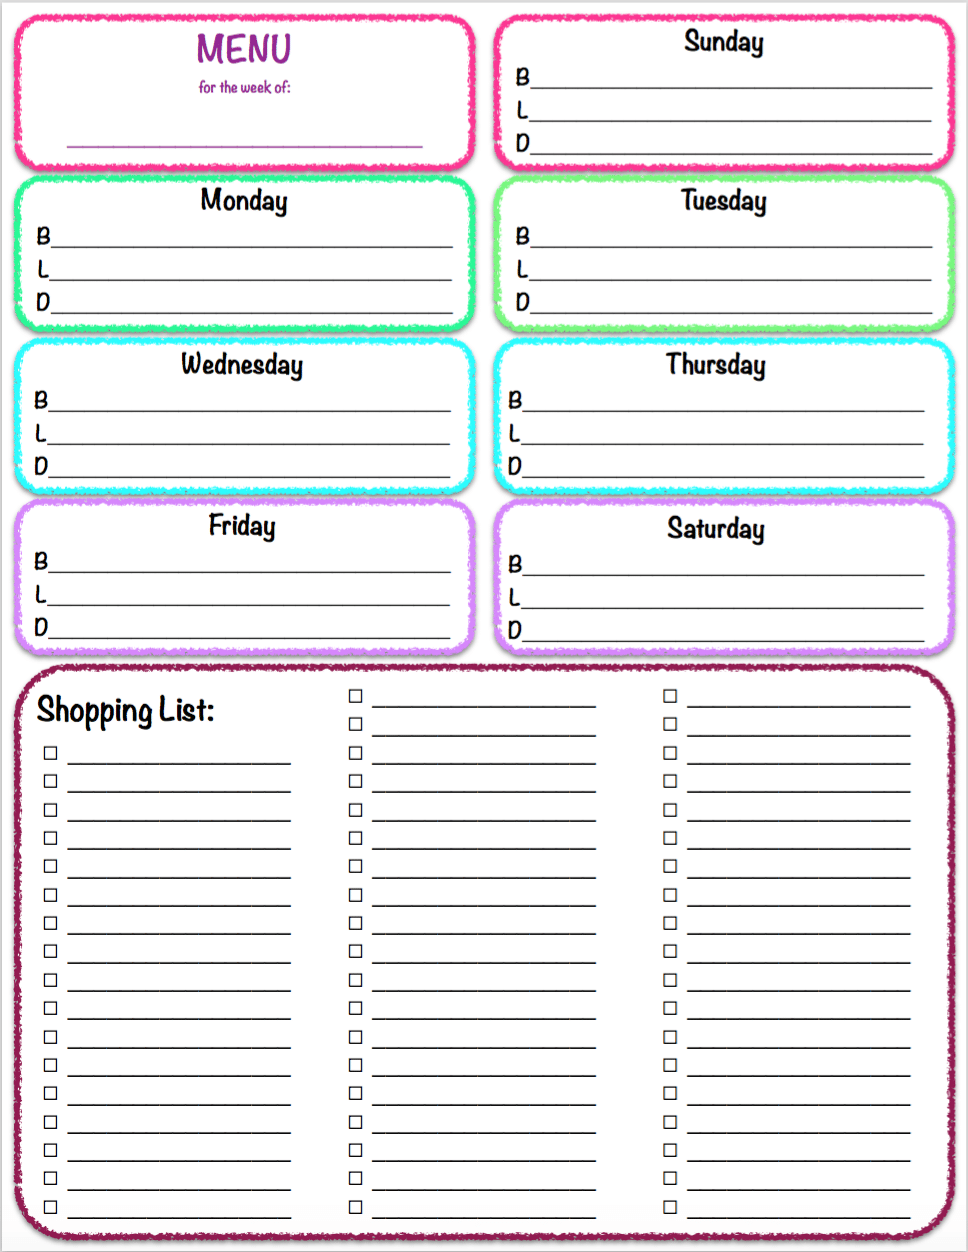 free-printables-weekly-meal-planner-grocery-list-the-housewife-modern